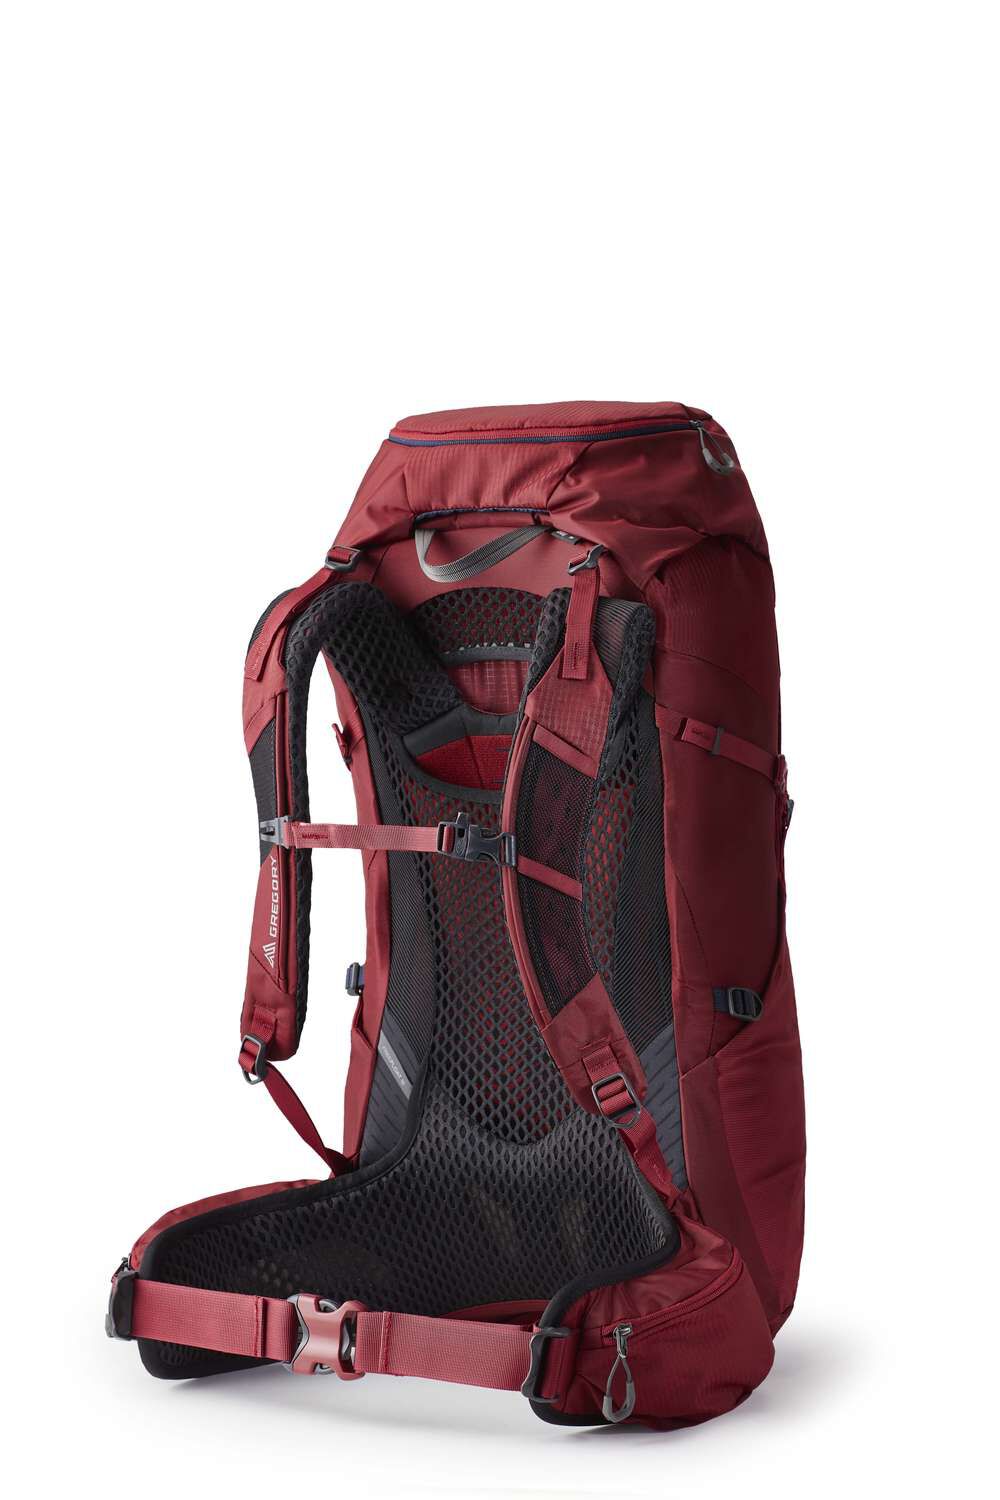 Jade 33 Backpack Ruby Red | Gregory Hungary